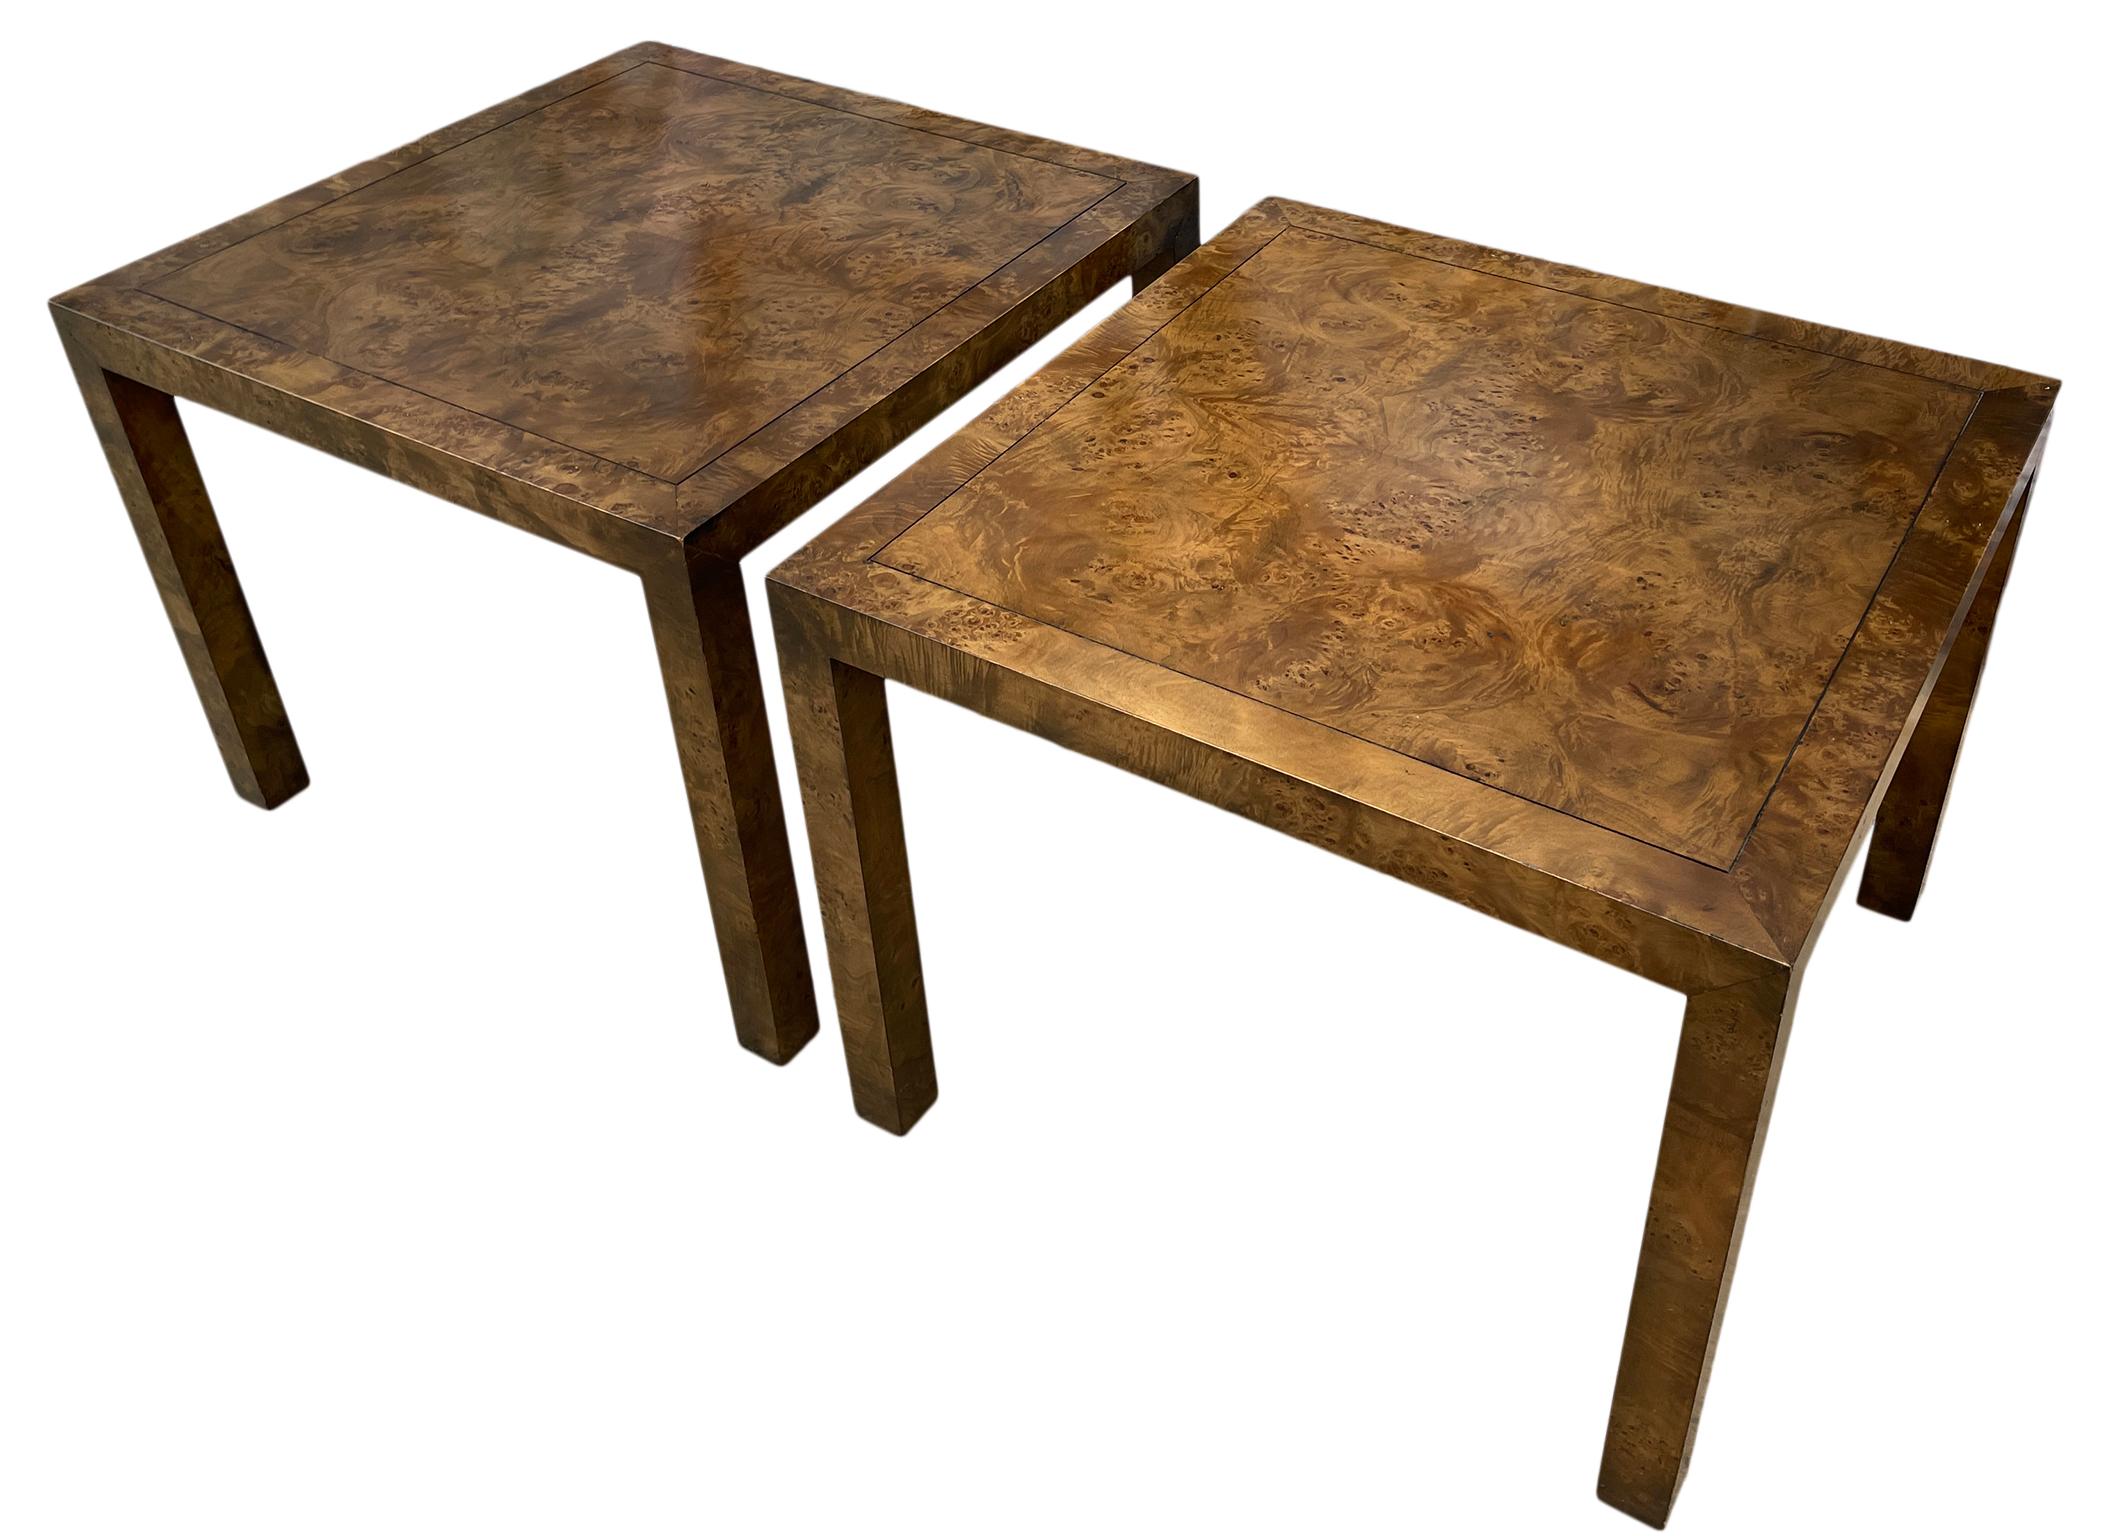 Pair of olive burl wood parsons end tables medium brown finish as seen in images. Marked #1516 under tables along with label - Fine Arts Furniture Co. Very good vintage condition. Sold as a pair of (2) tables.